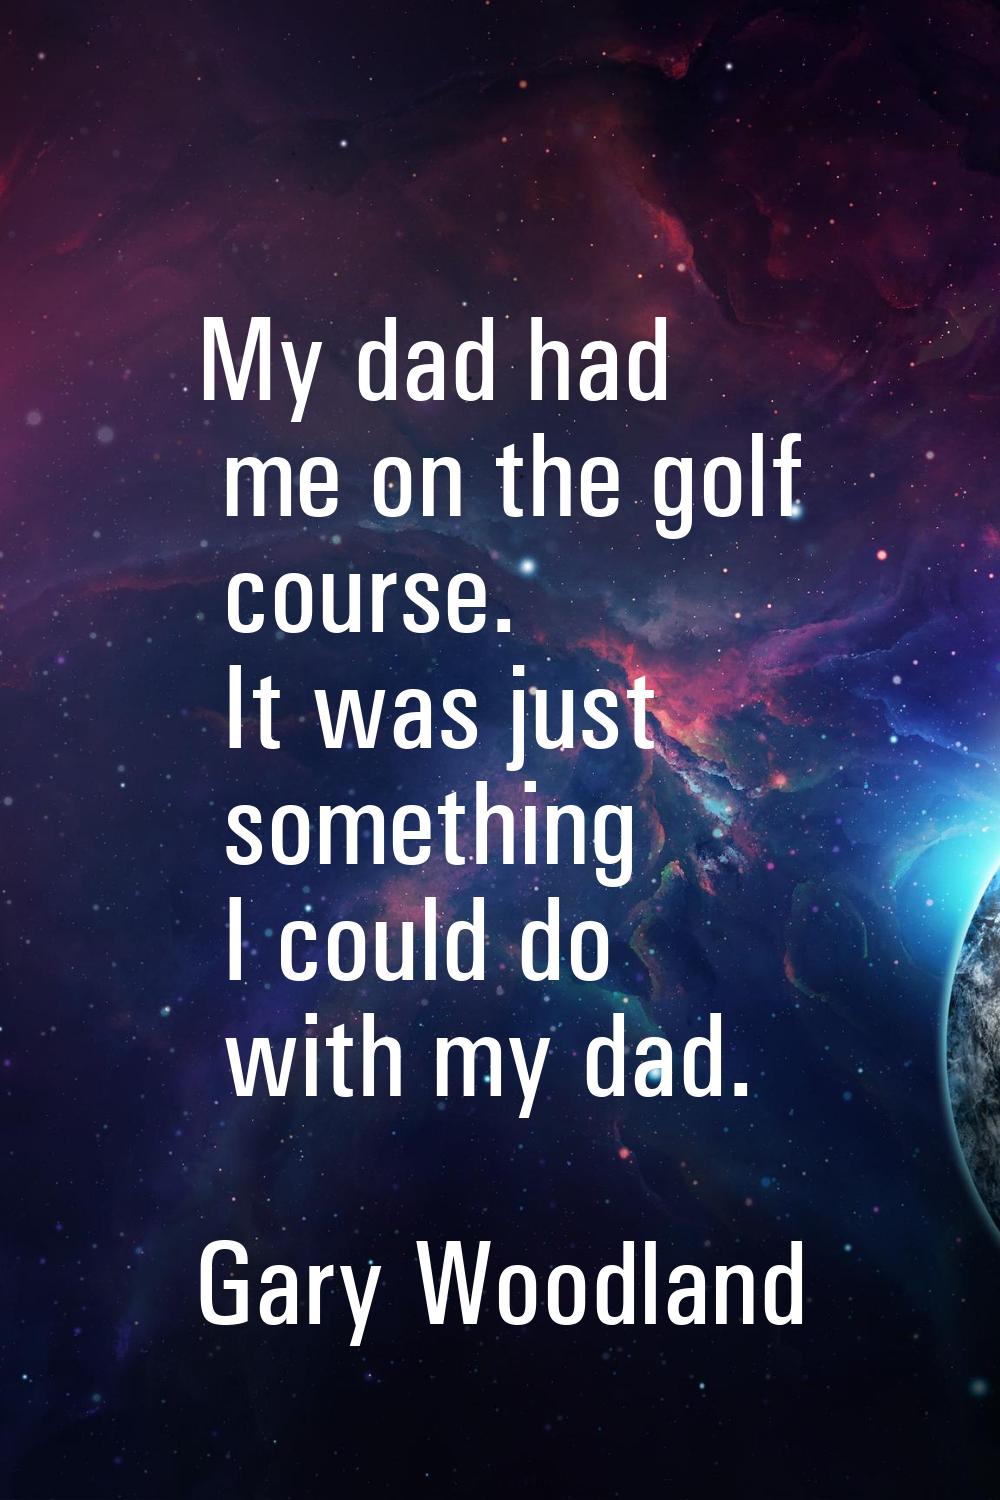 My dad had me on the golf course. It was just something I could do with my dad.